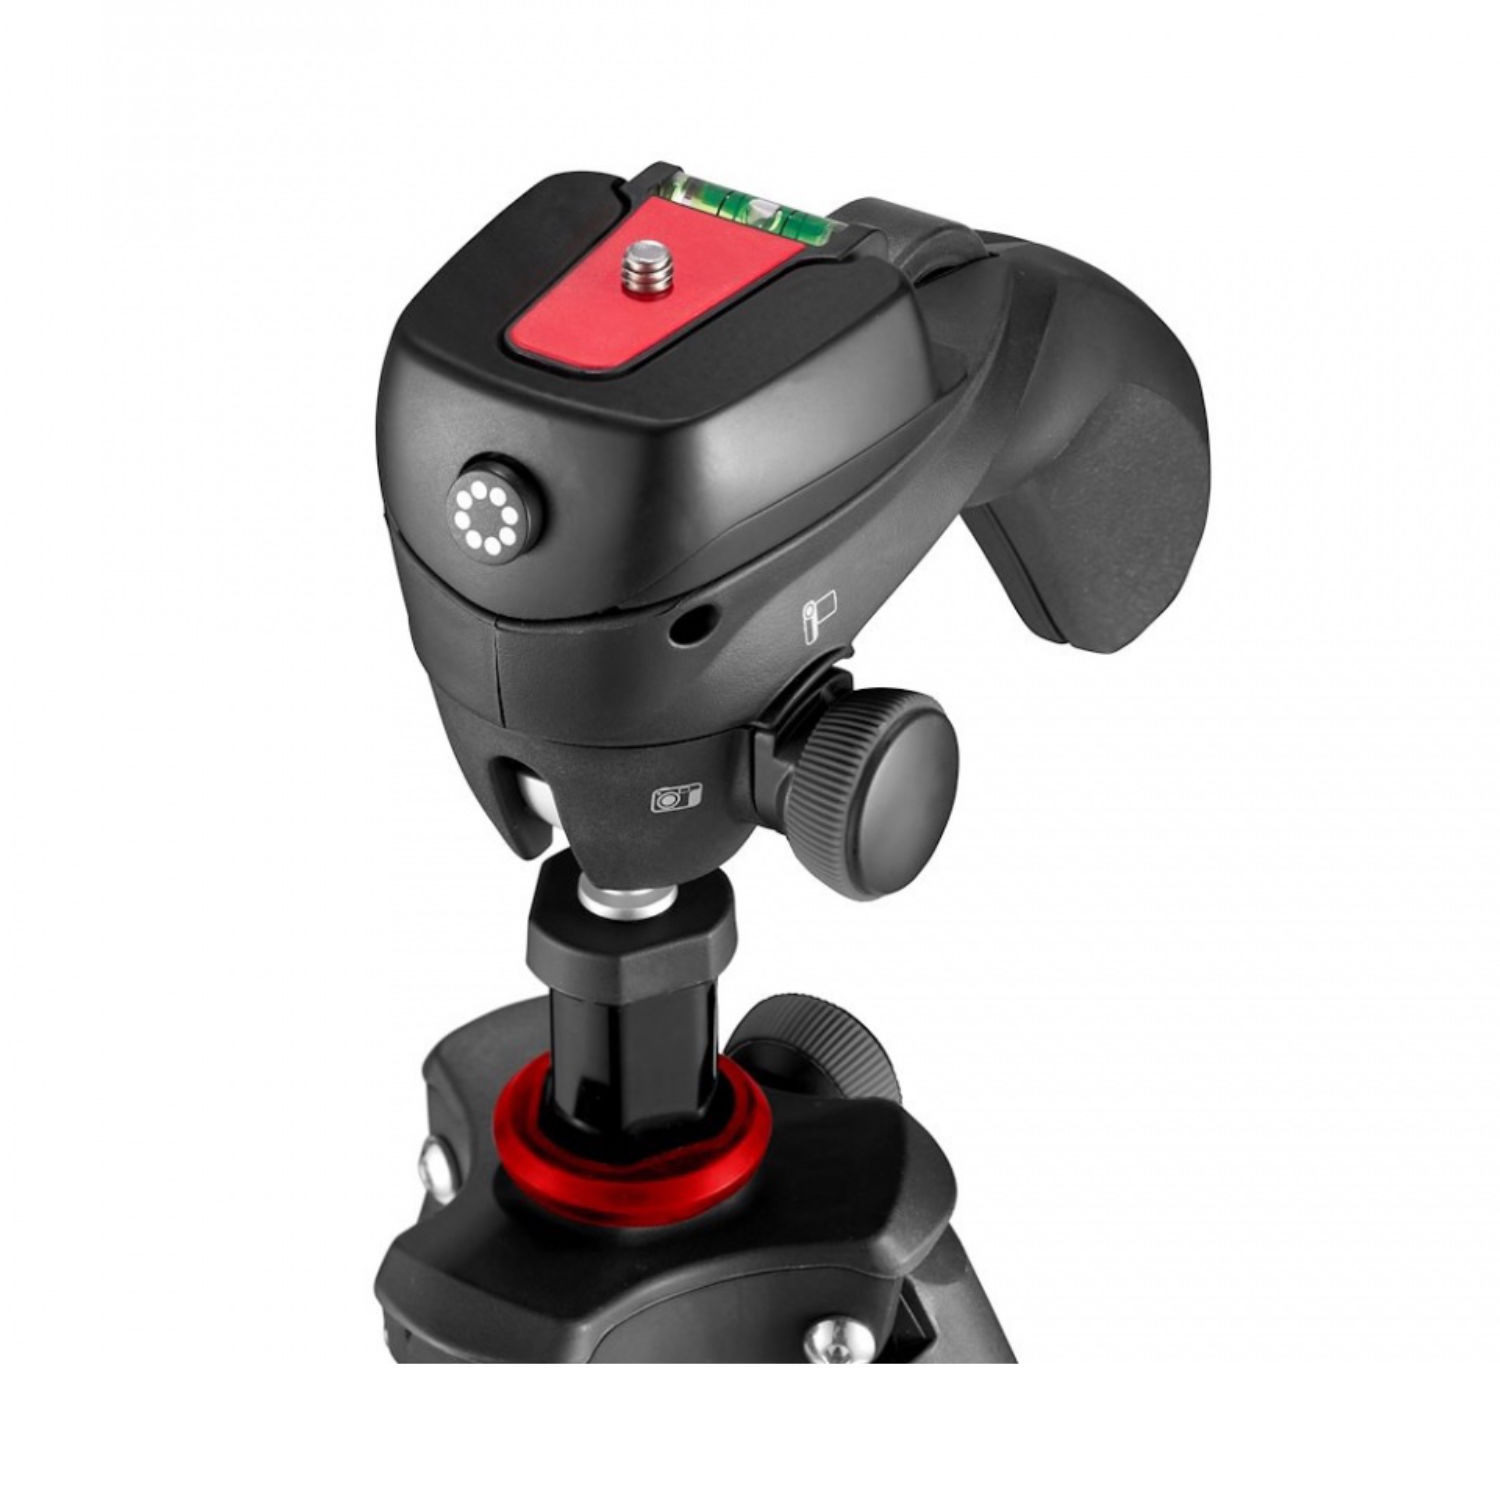 Joby Compact Action Kit with Phone Clamp